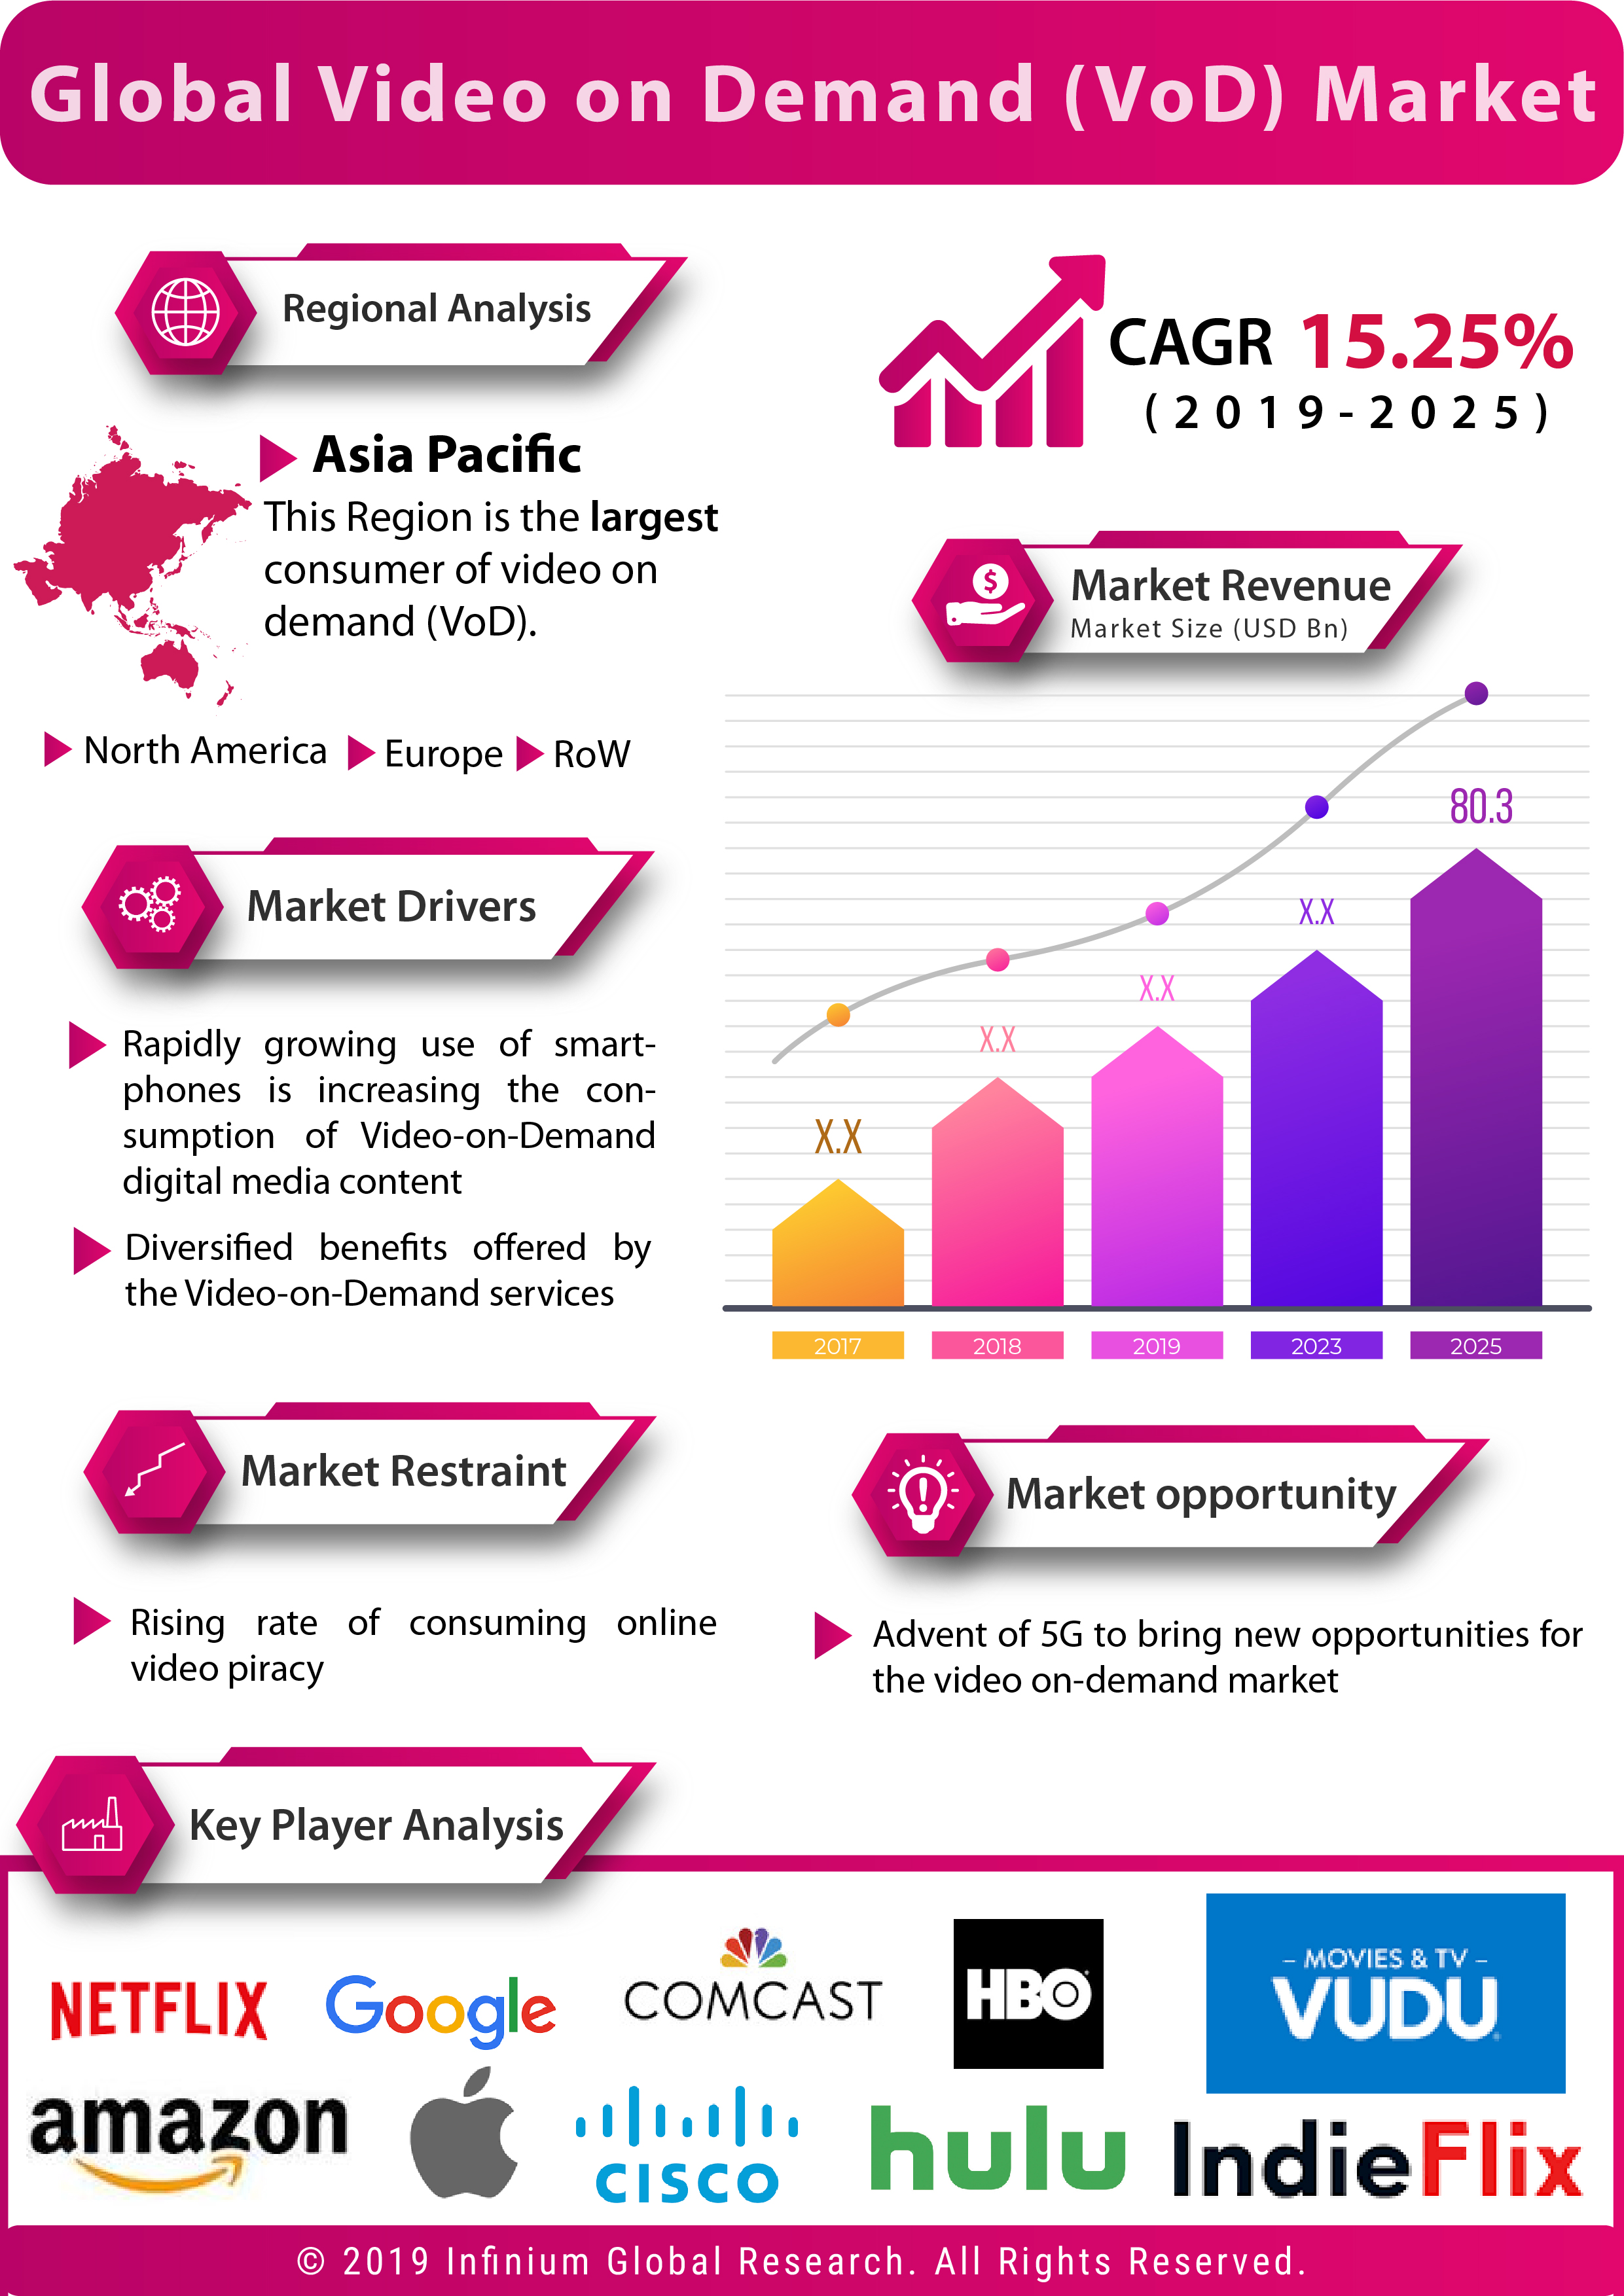 Global Video on Demand (VoD) Market is expected to grow at a CAGR of 15.25% over the Forecast Period of 2019– 2025